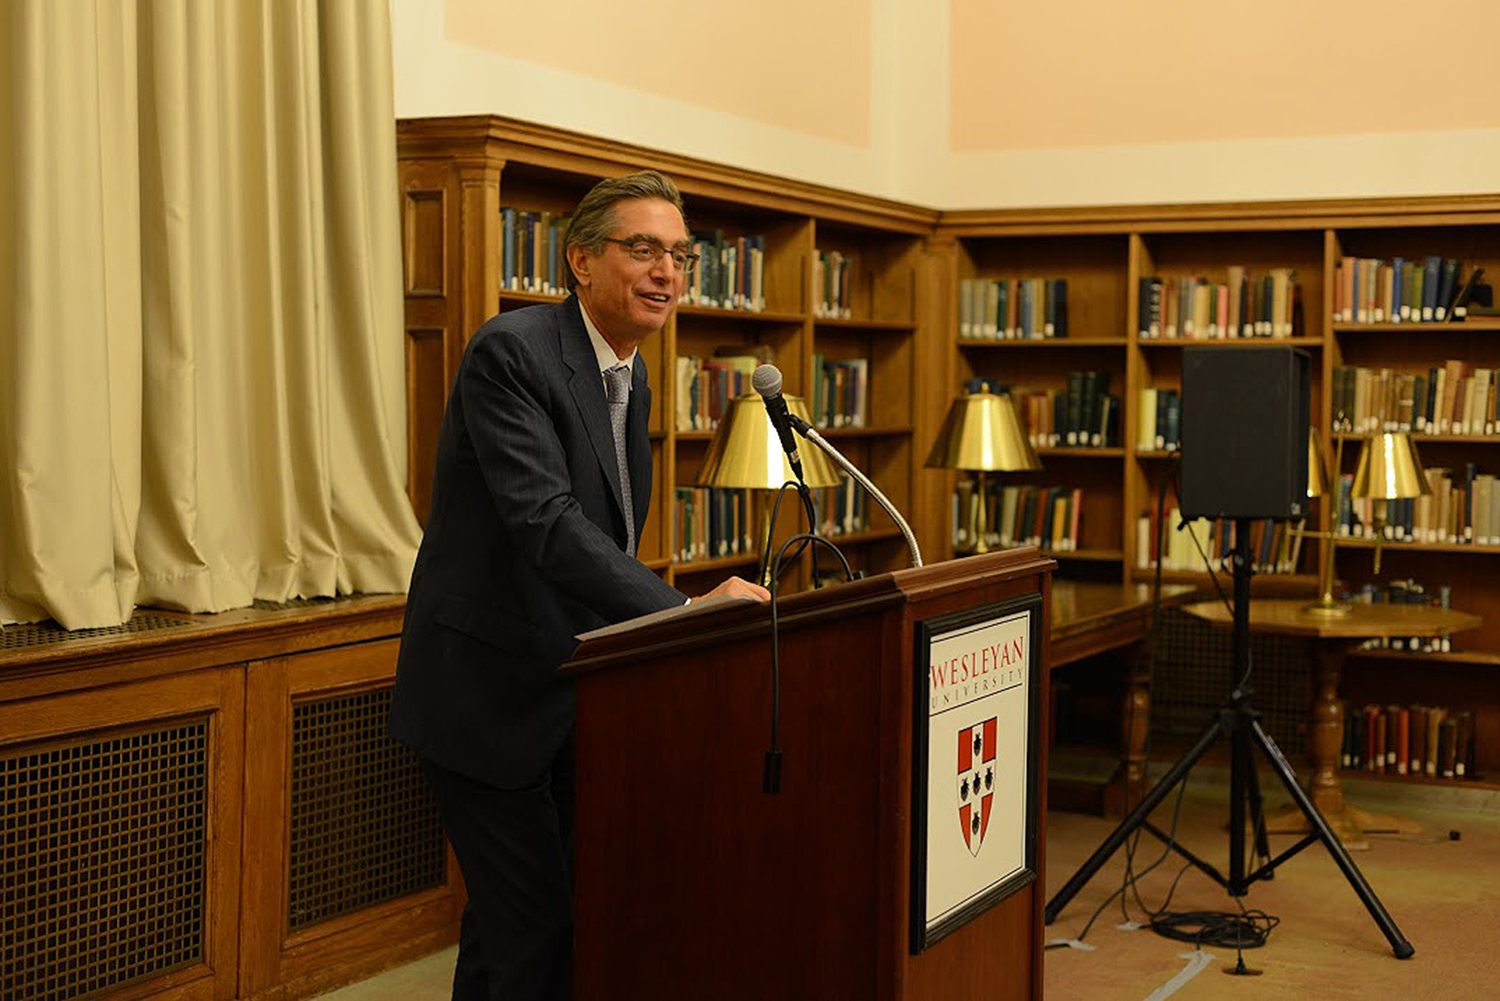 The annual lecture is hosted by the Friends of the Wesleyan Library.